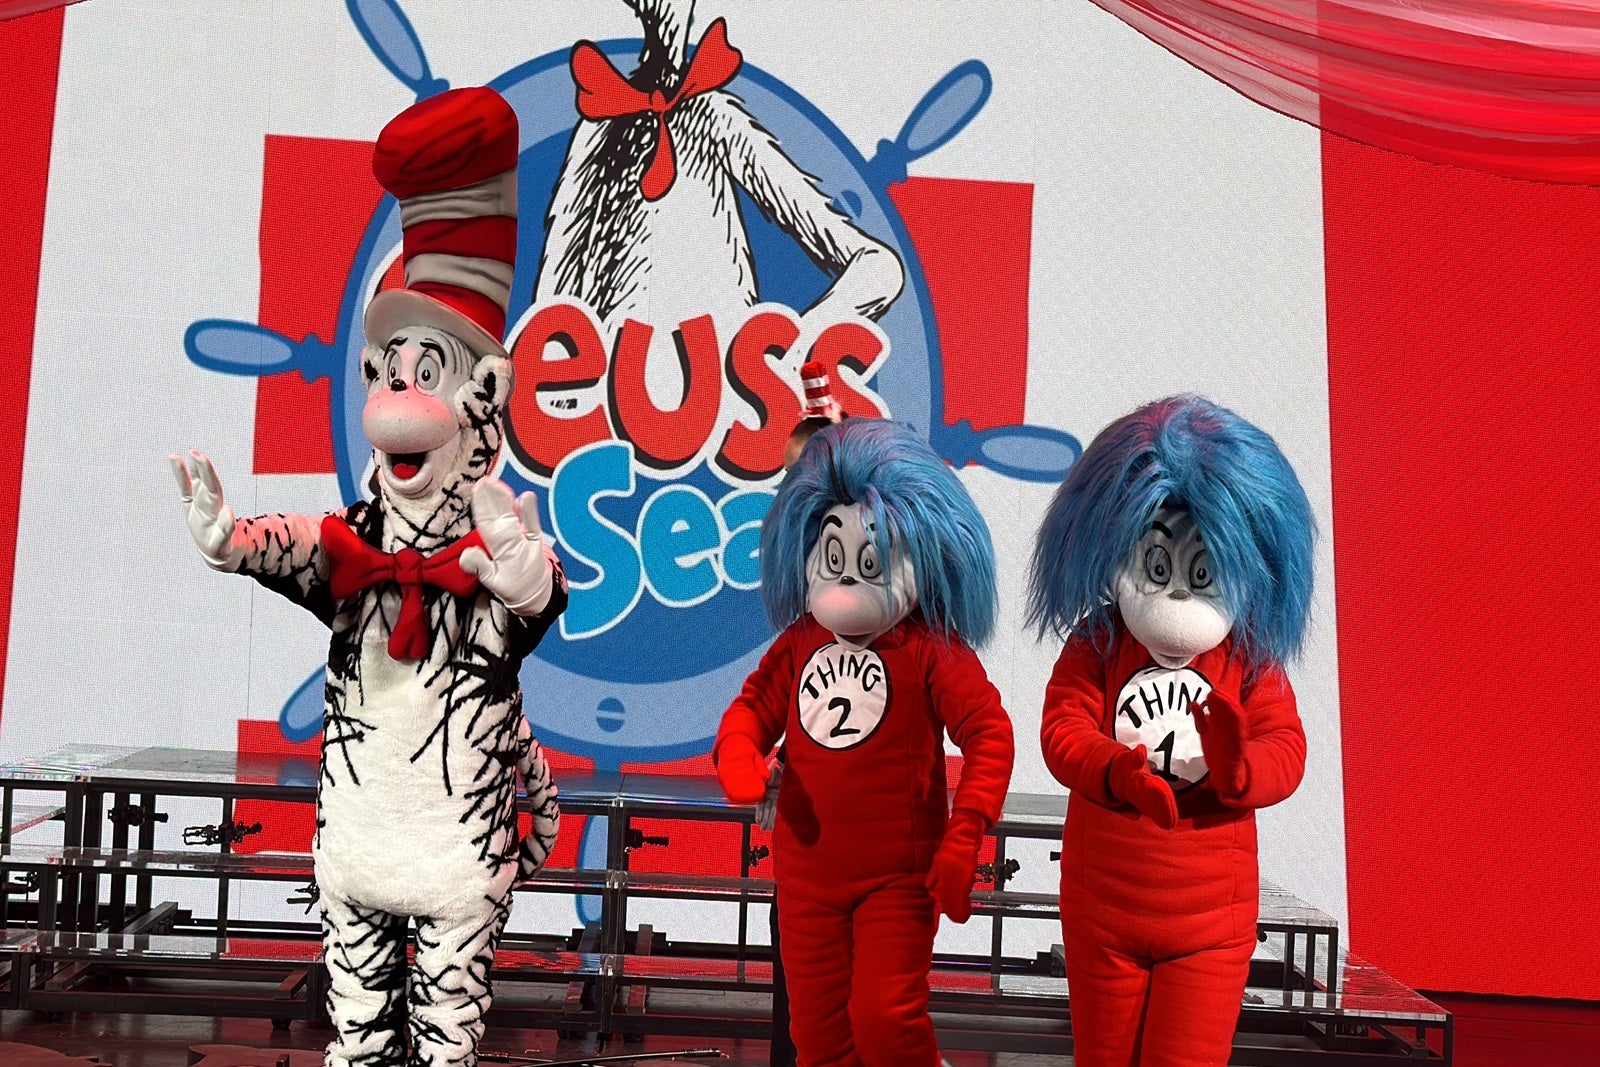 The Cat in the Hat and Things 1 and 2 standing on a stage in front of a Dr. Seuss backdrop